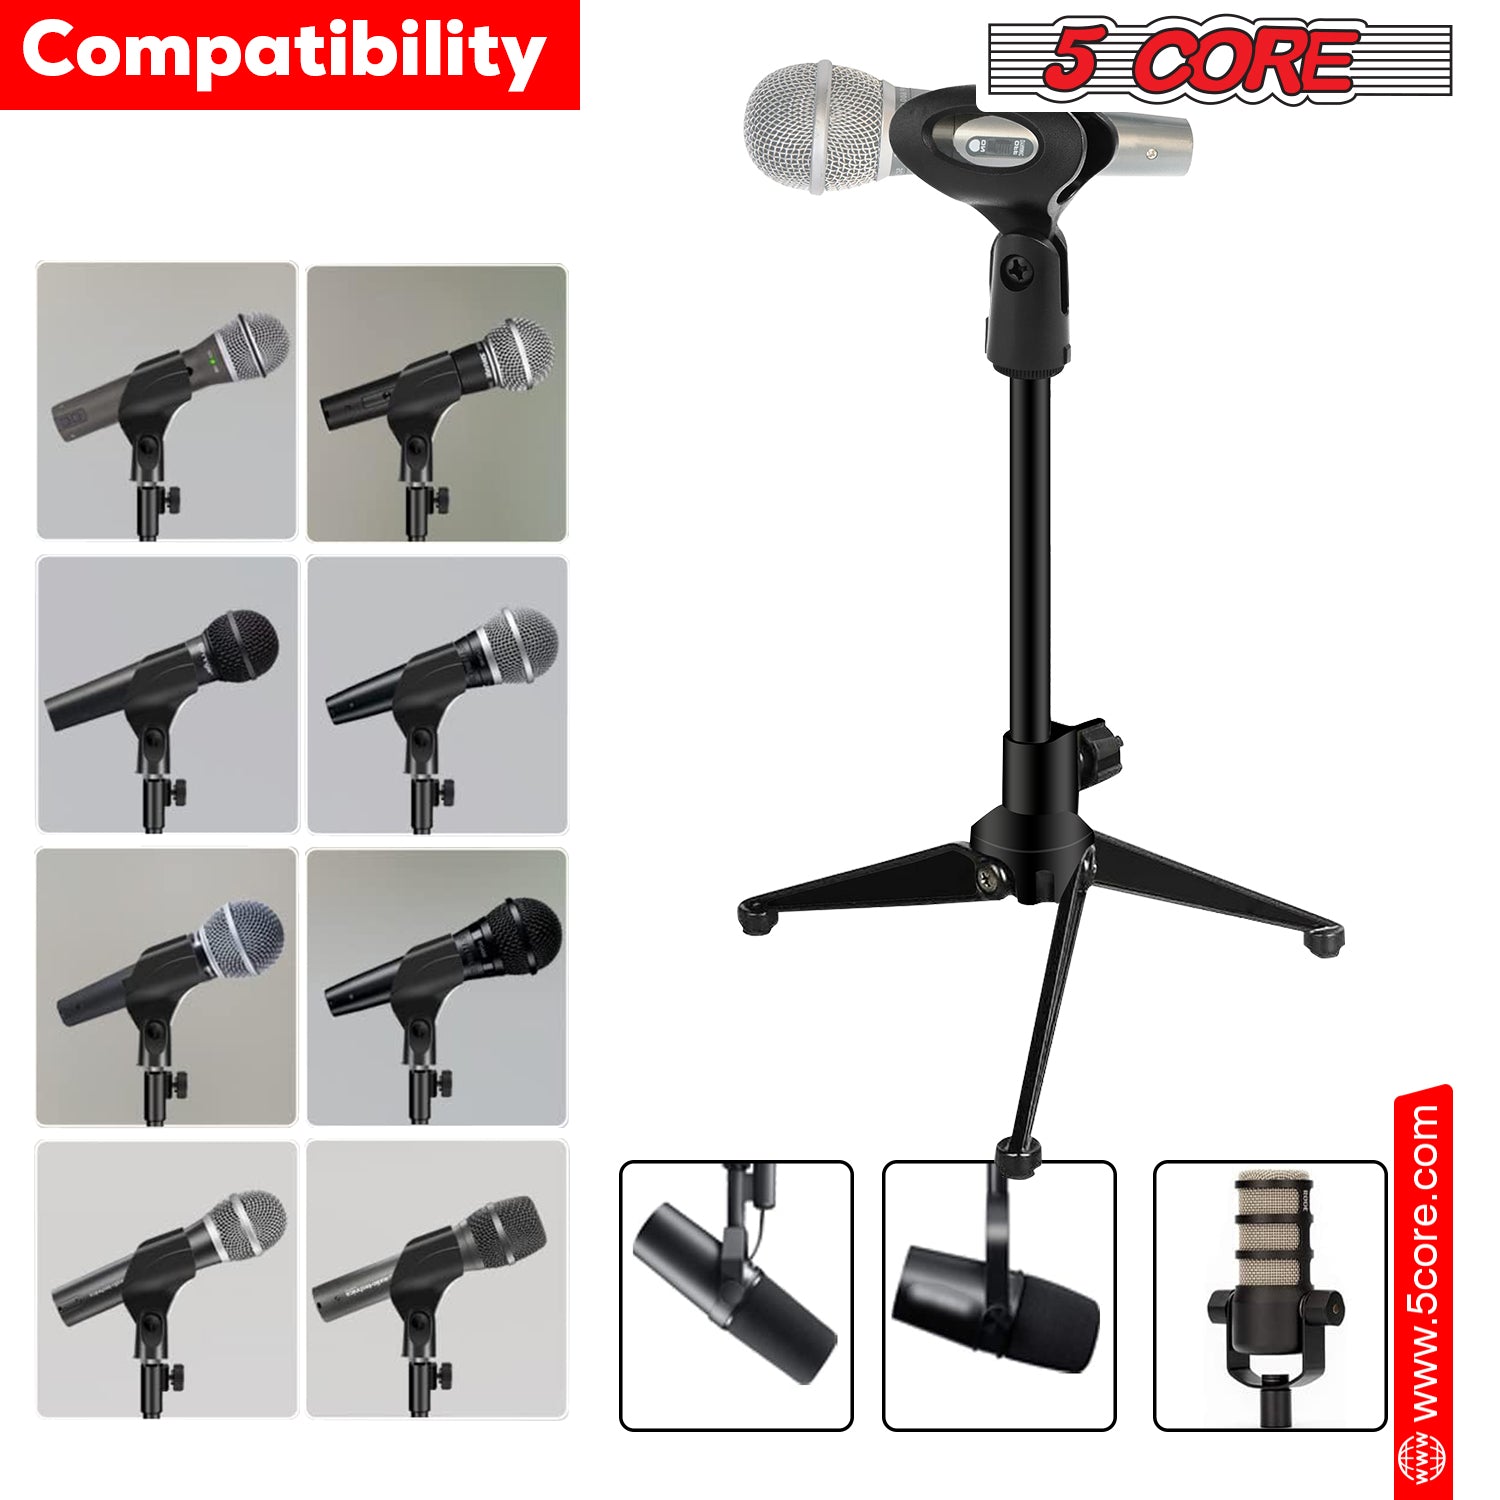 Adjustable table tripod mic stand: Perfect for versatile positioning.